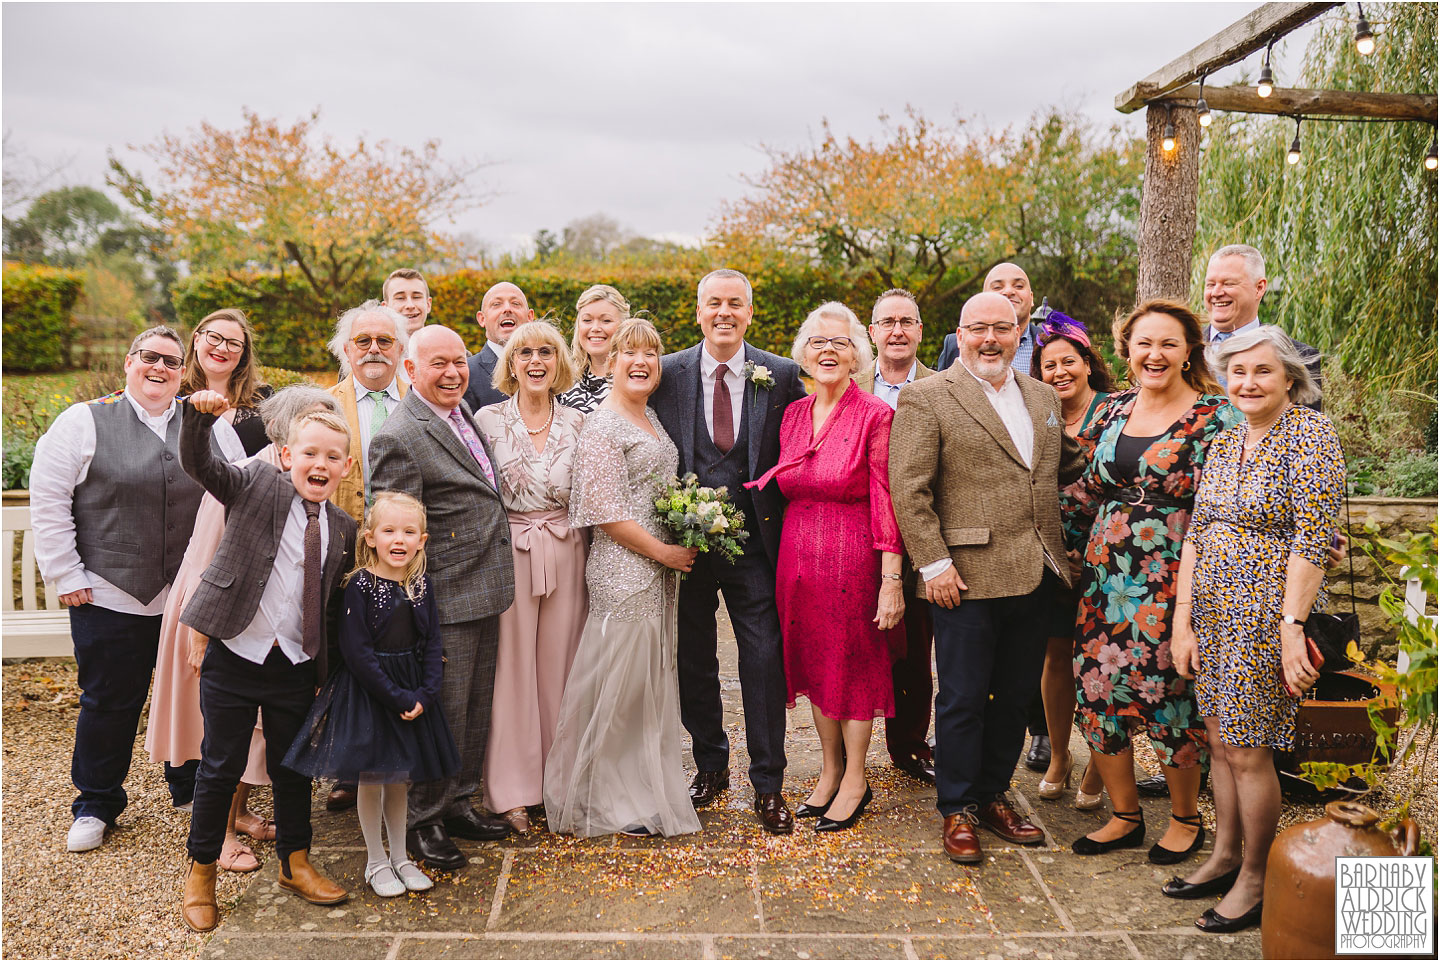 Group photos at The cross house lodge by the Star Inn in Harome, Wedding Photography by Yorkshire Wedding Photographer Barnaby Aldrick, Star Inn wedding, Yorkshire wedding, Helmsley Wedding, Michelin Star Wedding venues